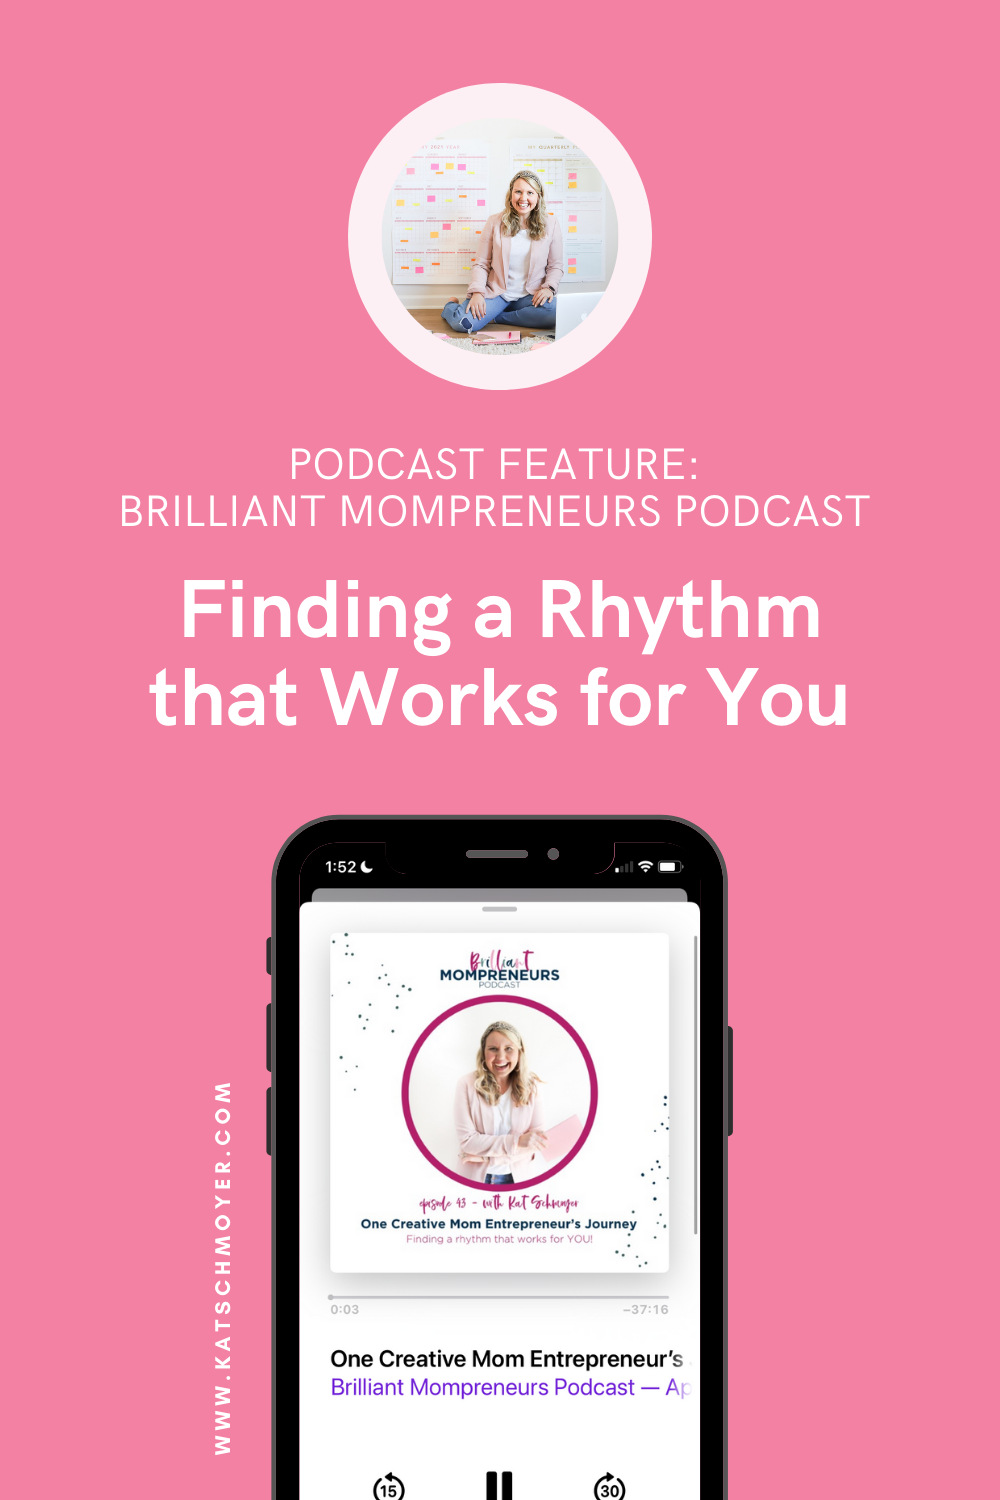 Podcast Feature: Finding a Rhythm that Works for You